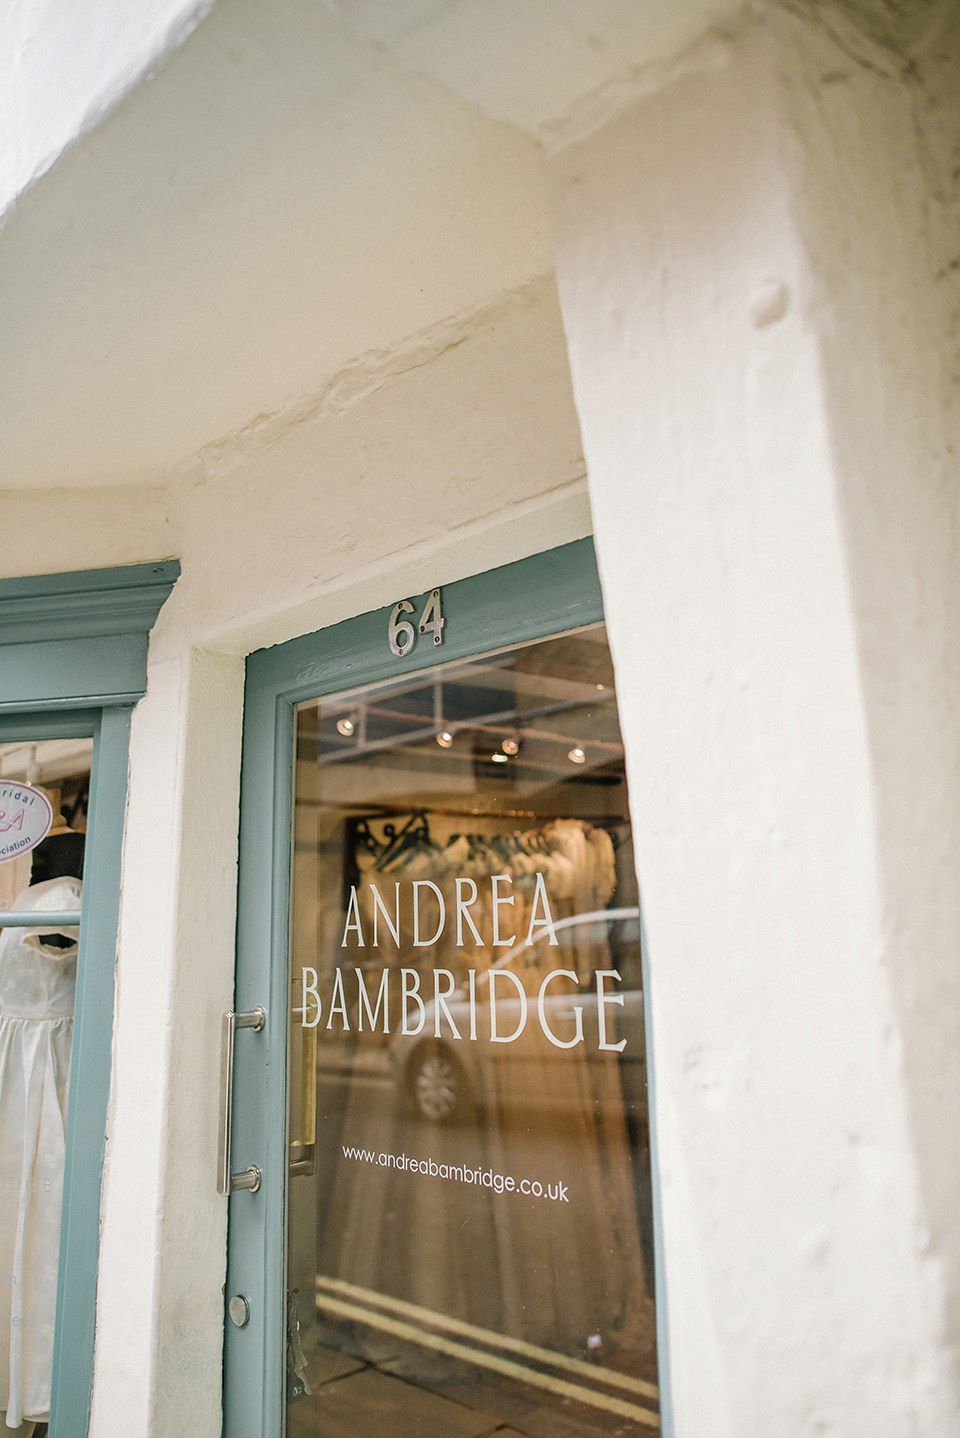 Andrea Bambridge is celebrating 700 years of 'Our Lady's Row' - a quaint row of cottages in the hart of York which also homes their bridal boutique. Photography by Georgina Harrison.